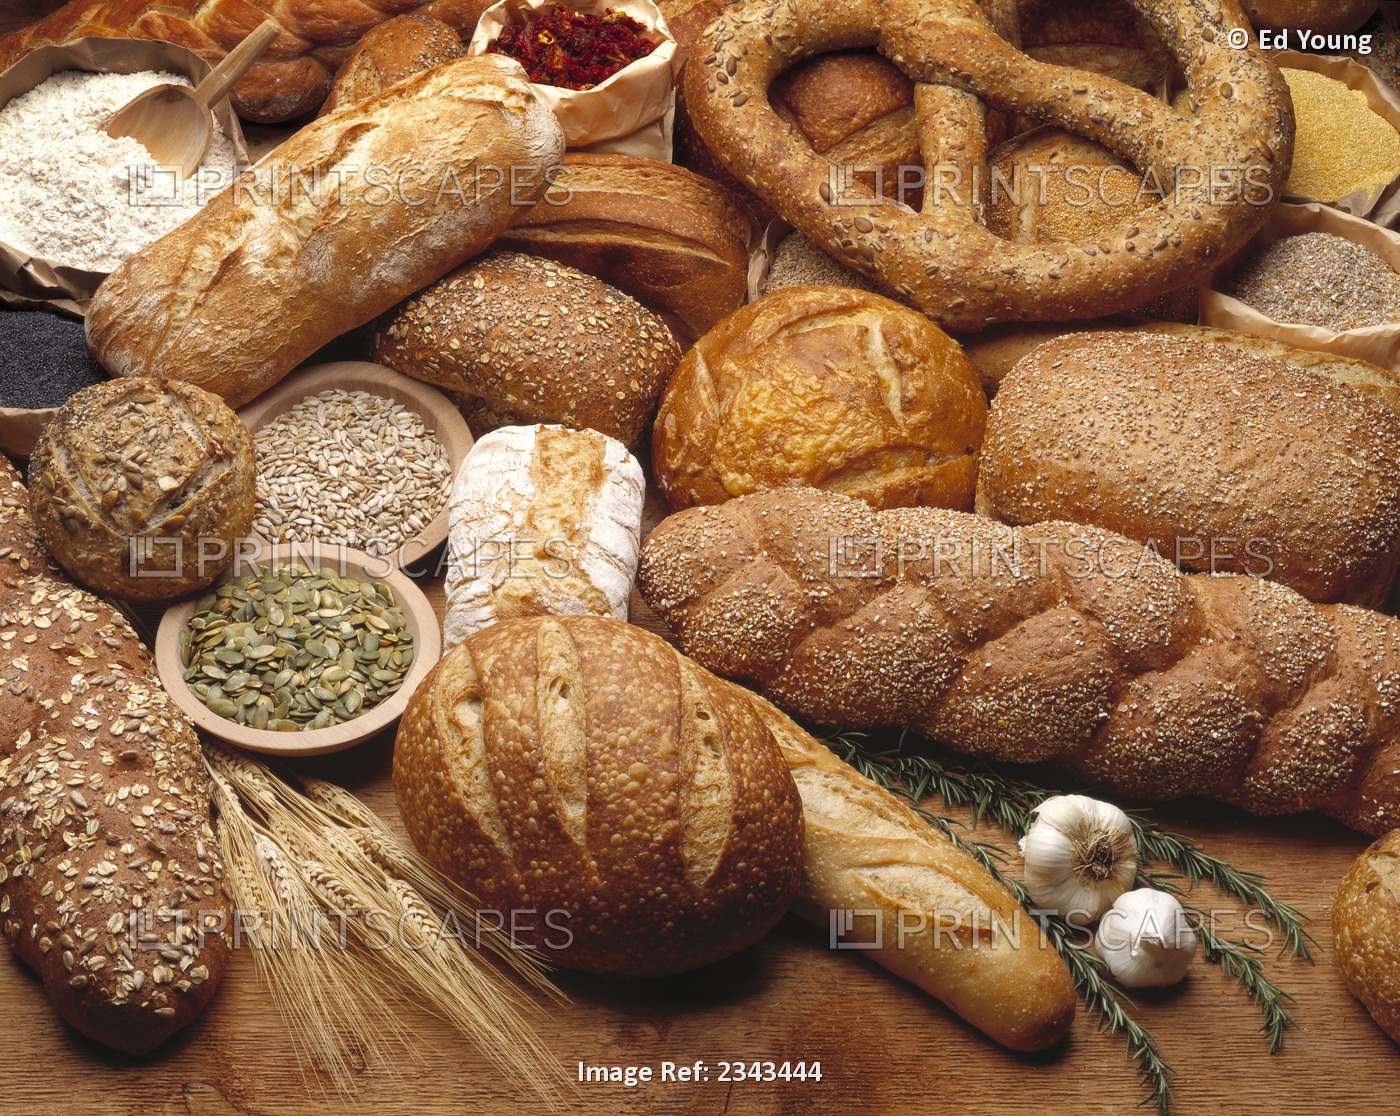 Food - Various Types Of Breads And Some Of Their Ingredients.